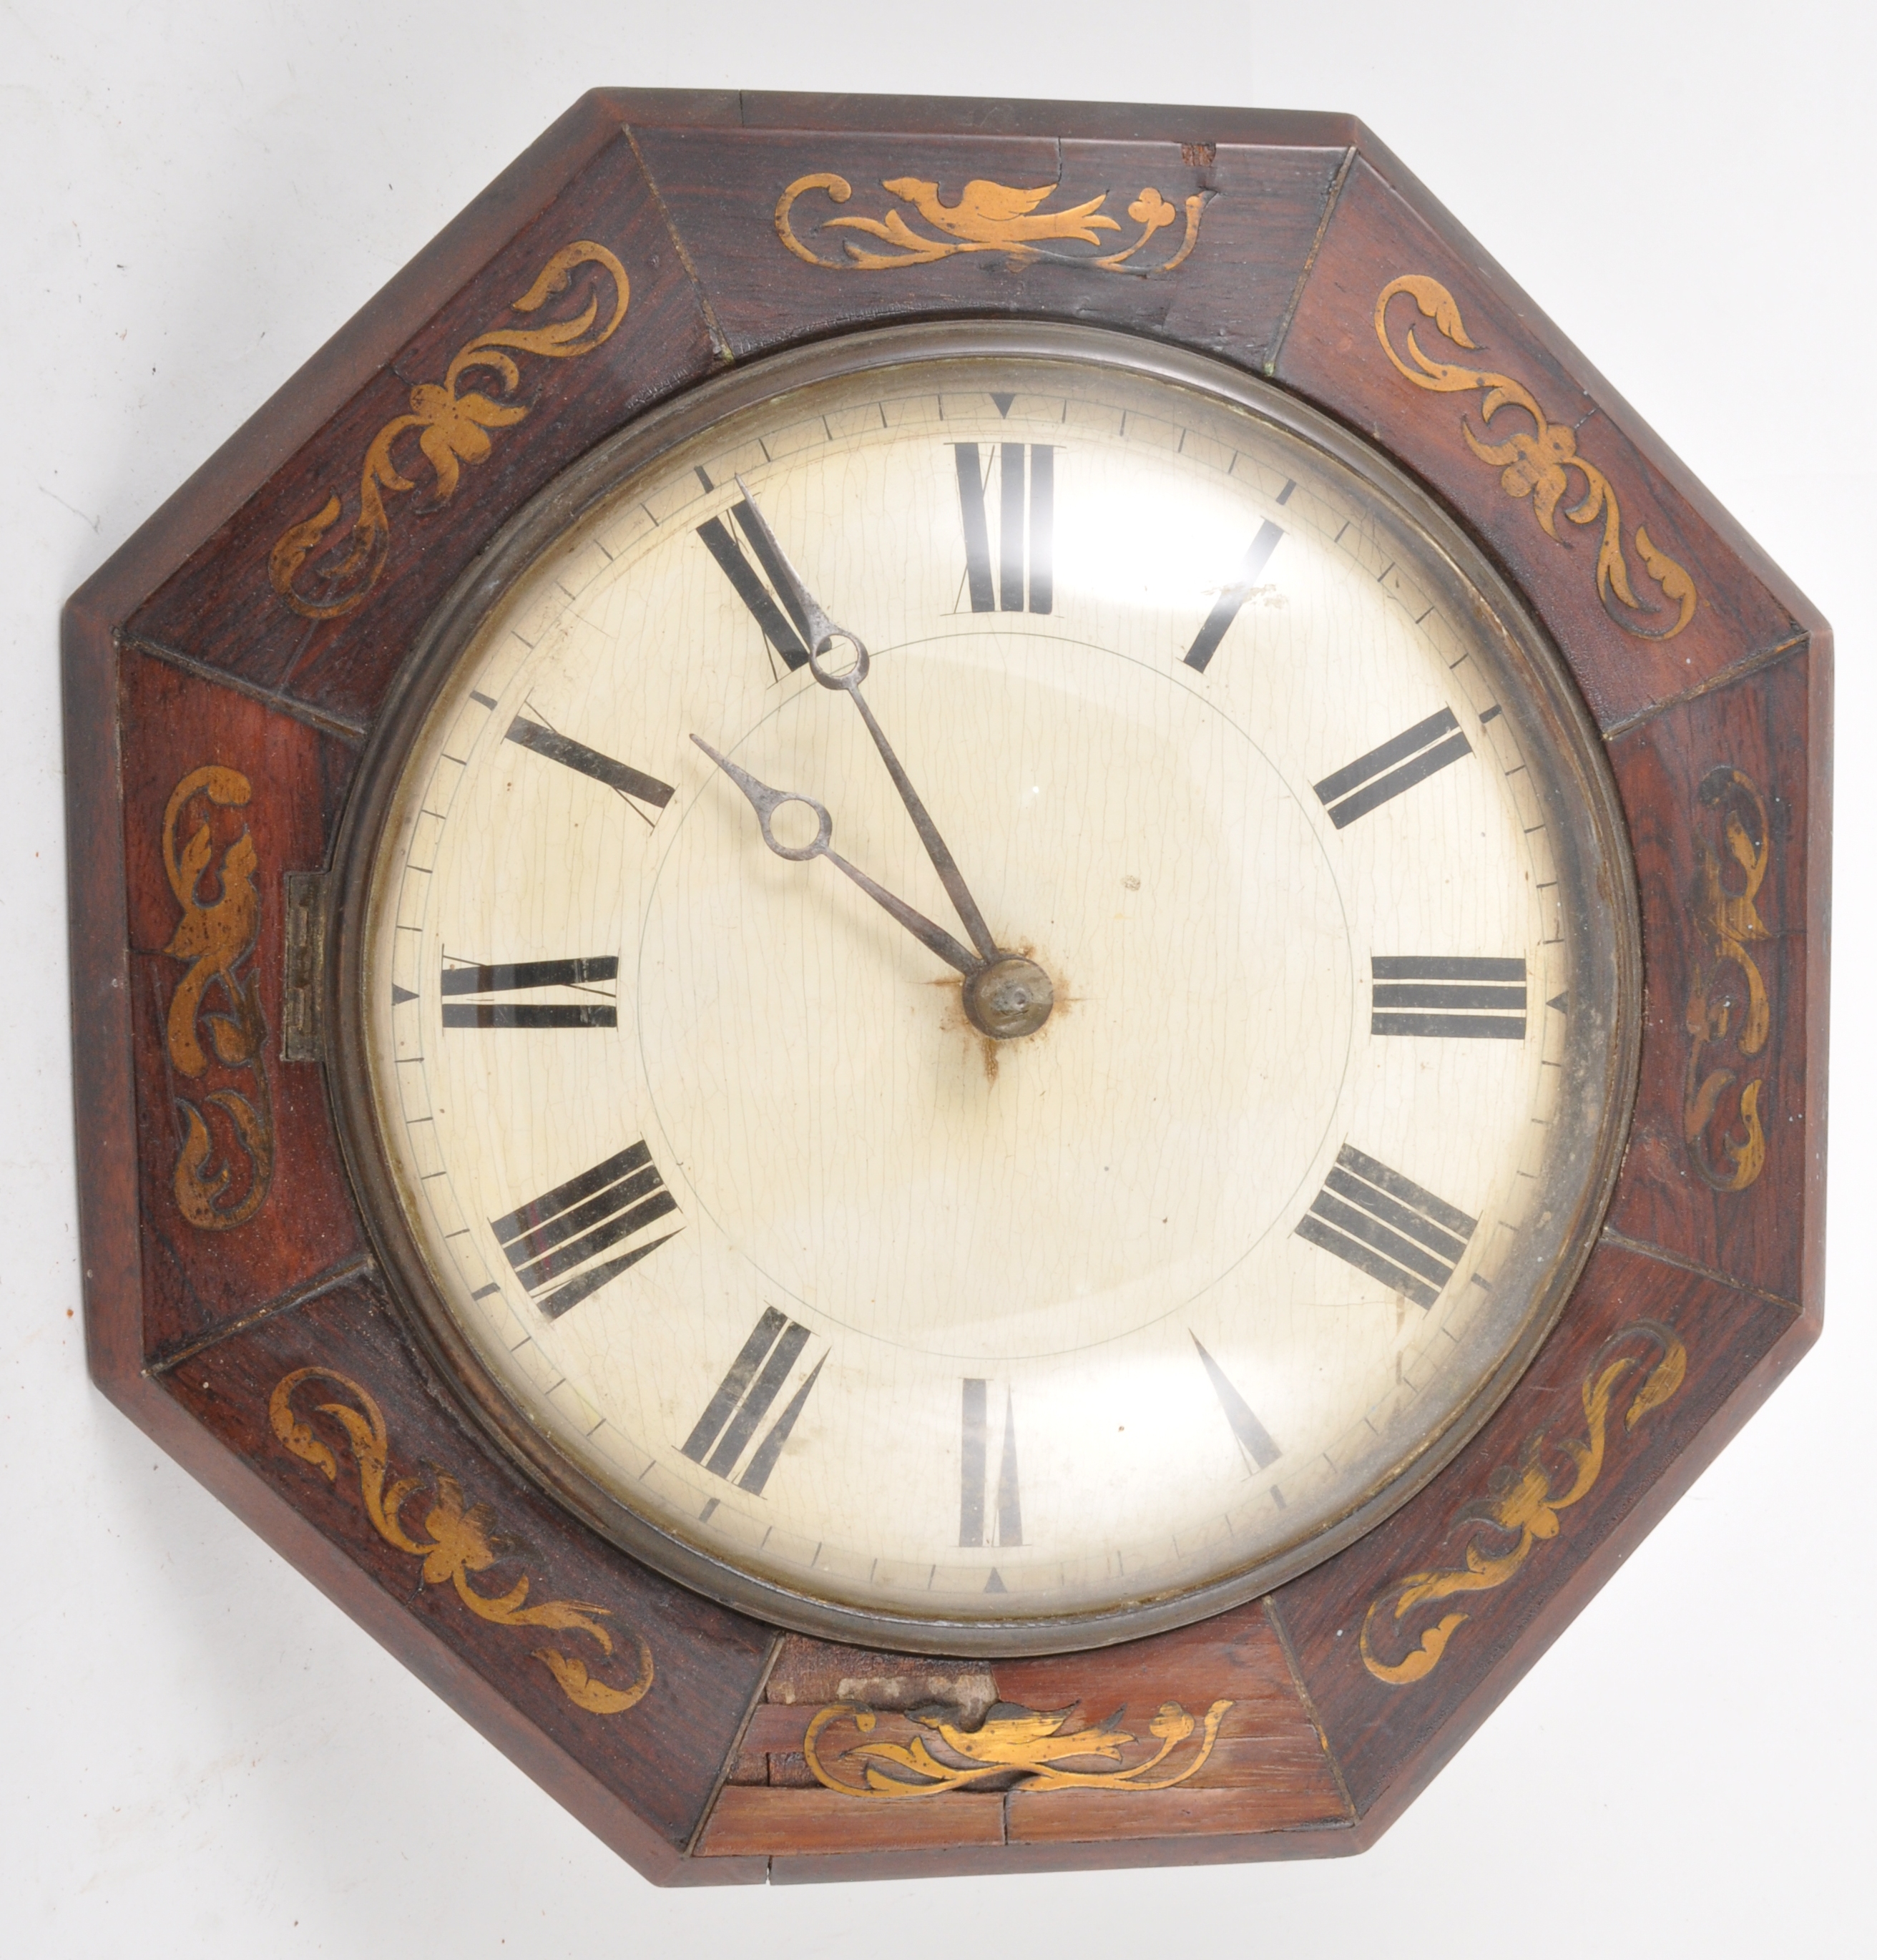 Octagon wall clock, inlaid surround, with weights, no pendulum (possibly American), 33cm.